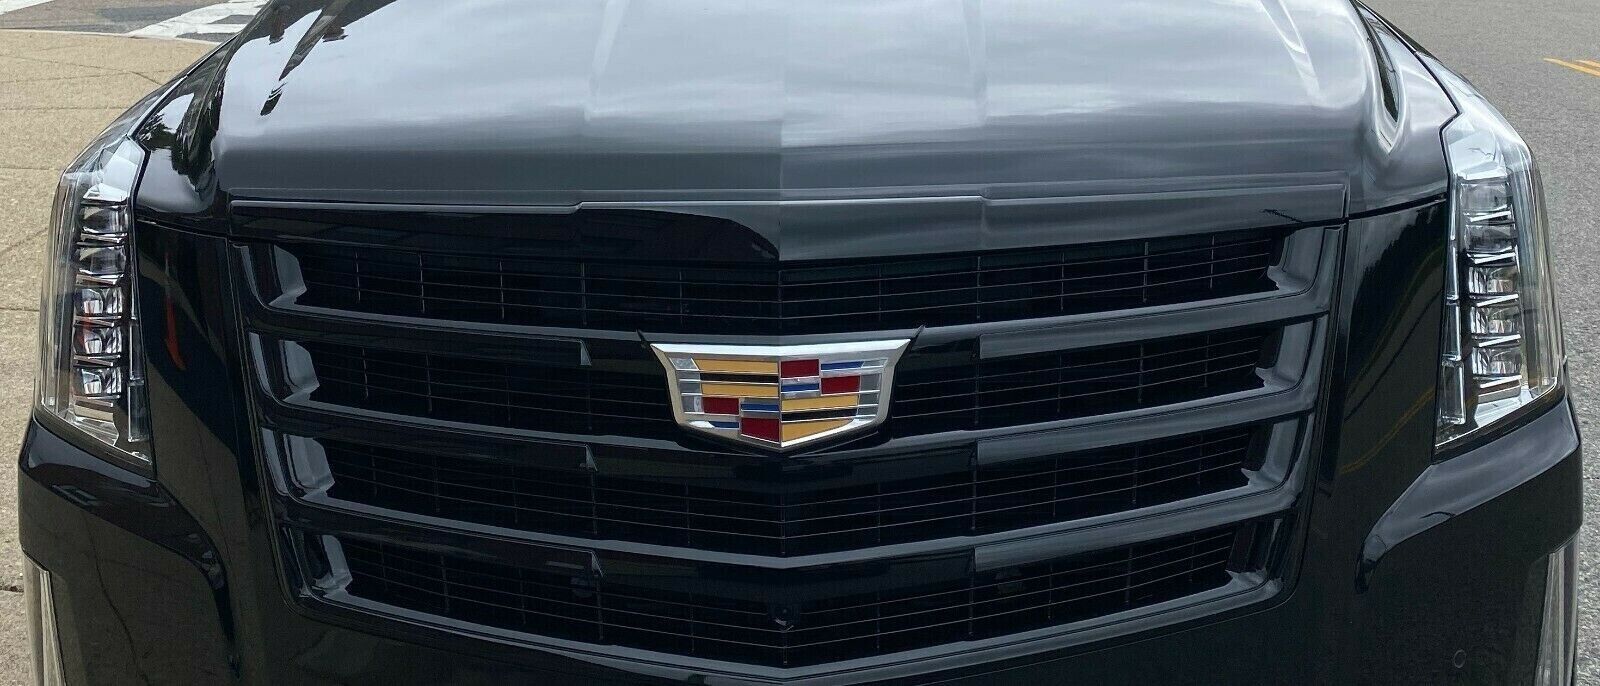 GM OEM Cadillac Escalade 2015-2020 Black Front Grille Generation 4 Brand New